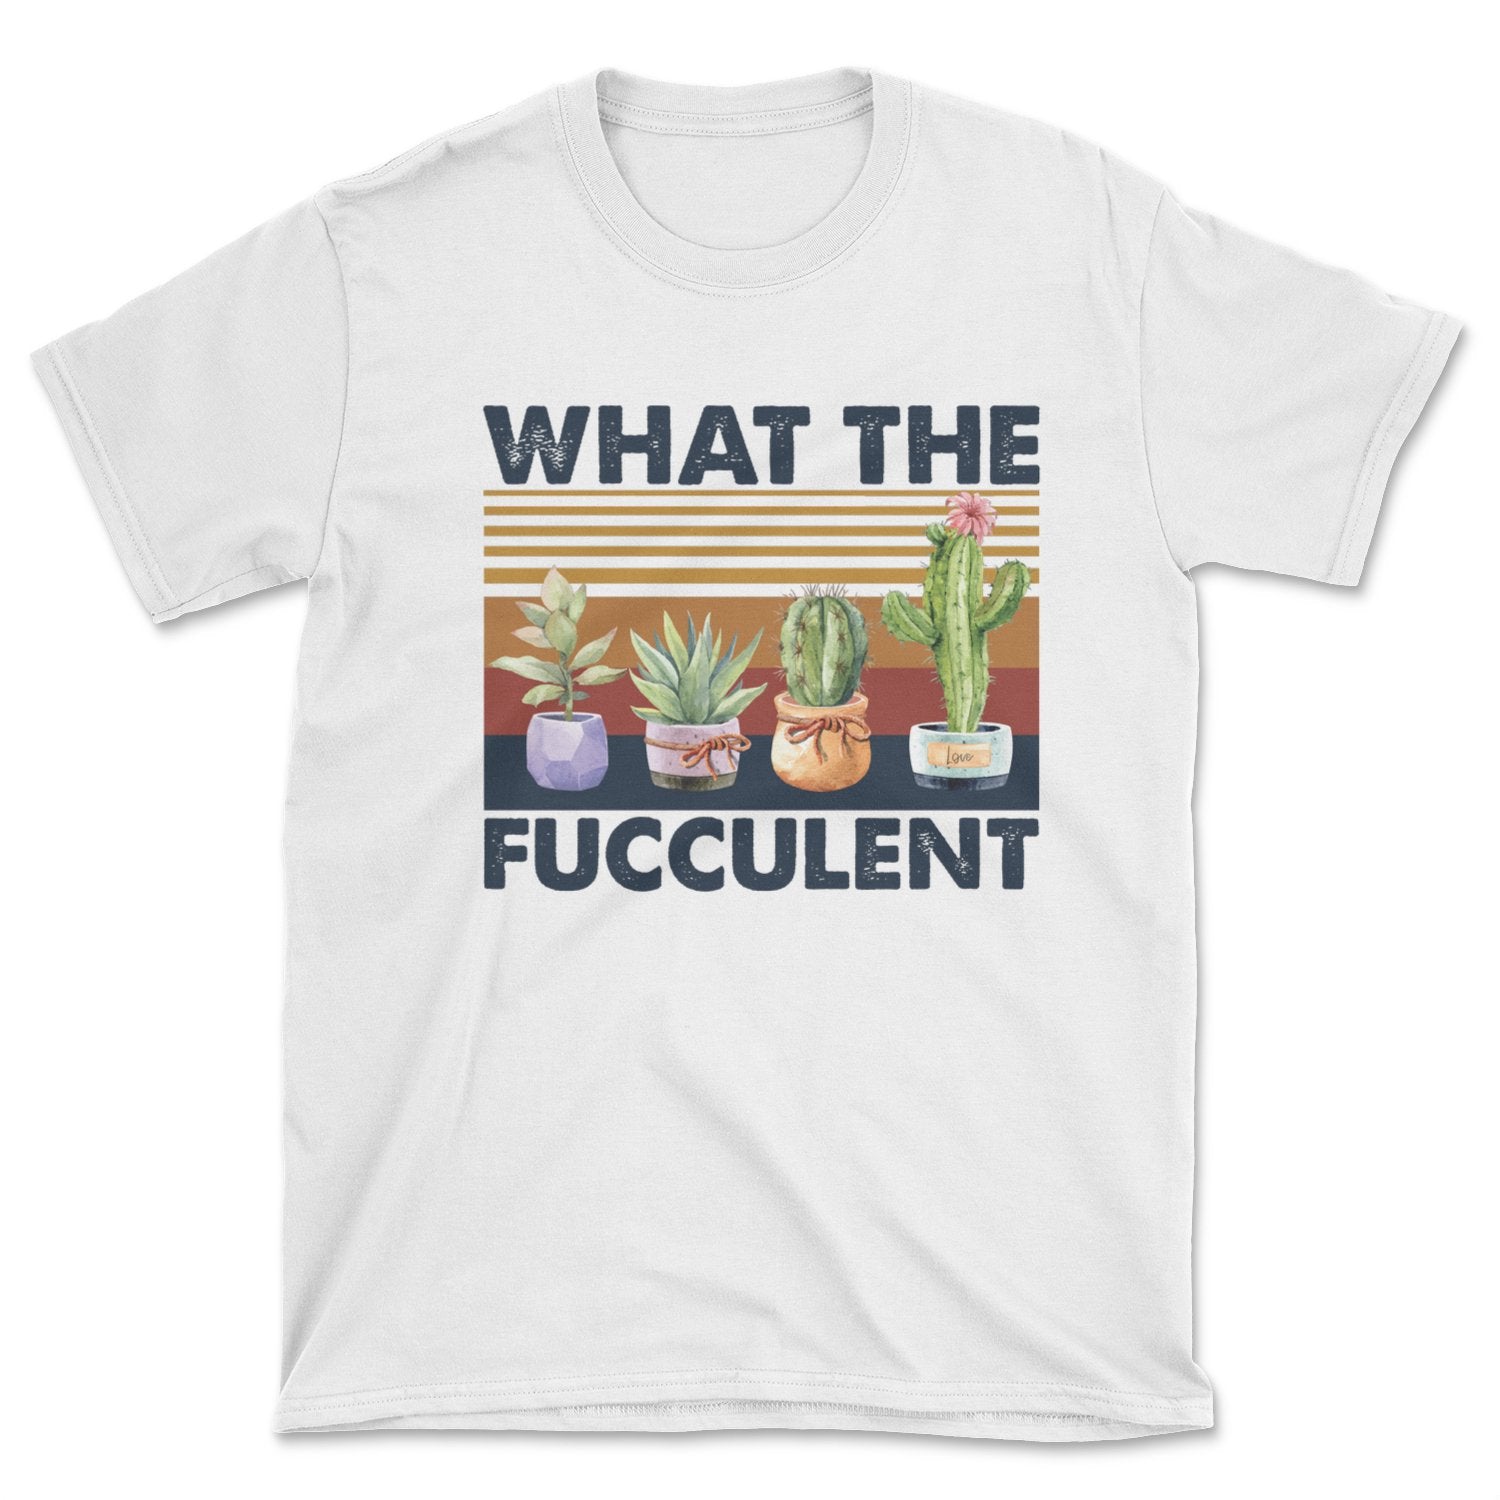 What The Fucculent Tee Shirt.